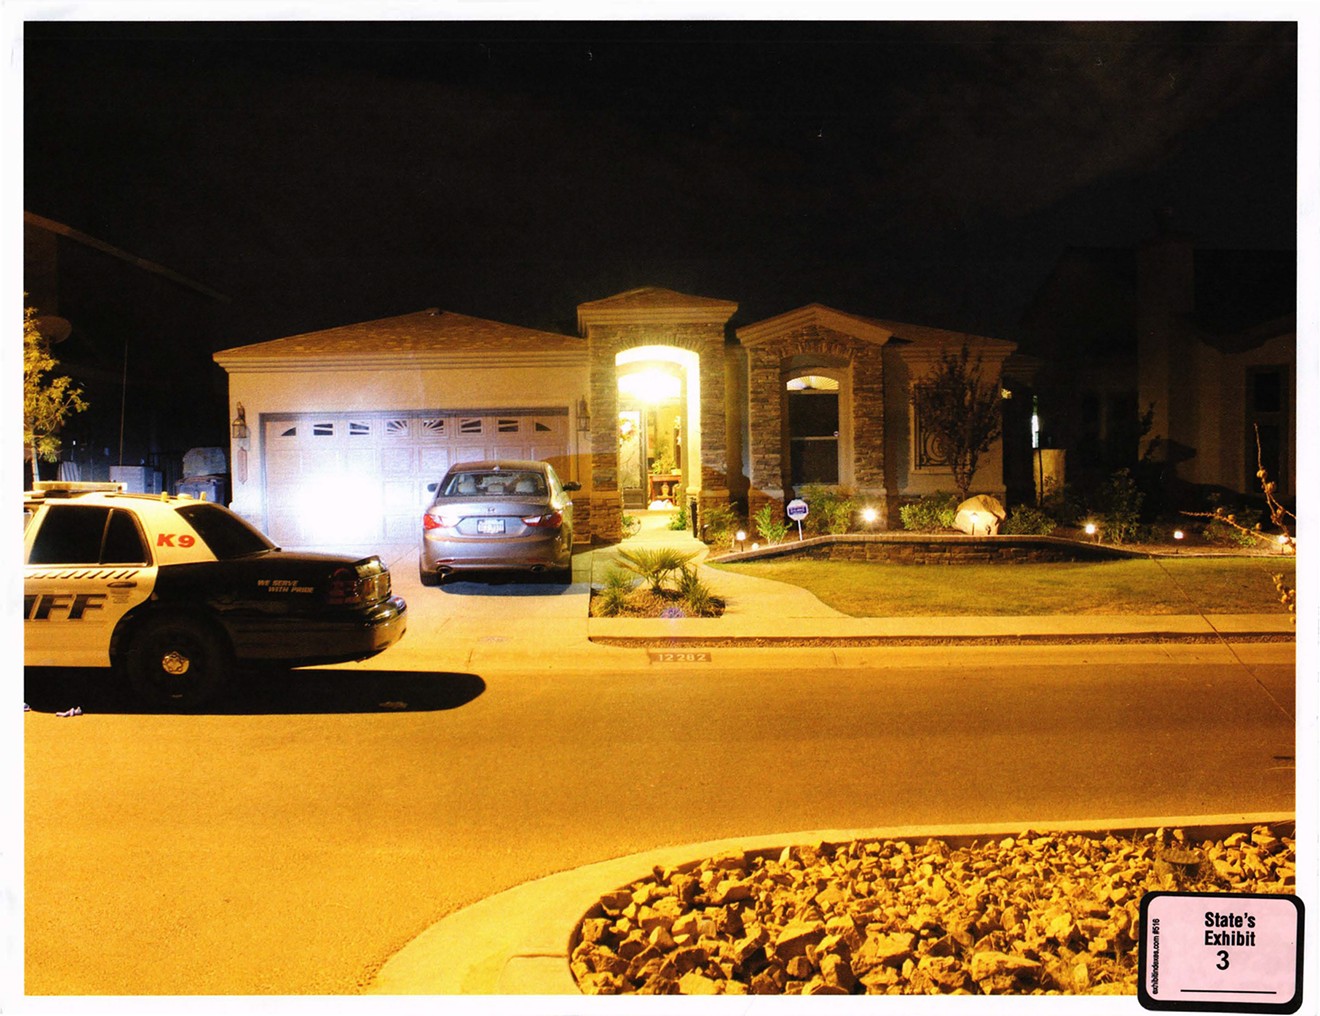 A crime scene photo shows the Apilado house on the night of the shooting.